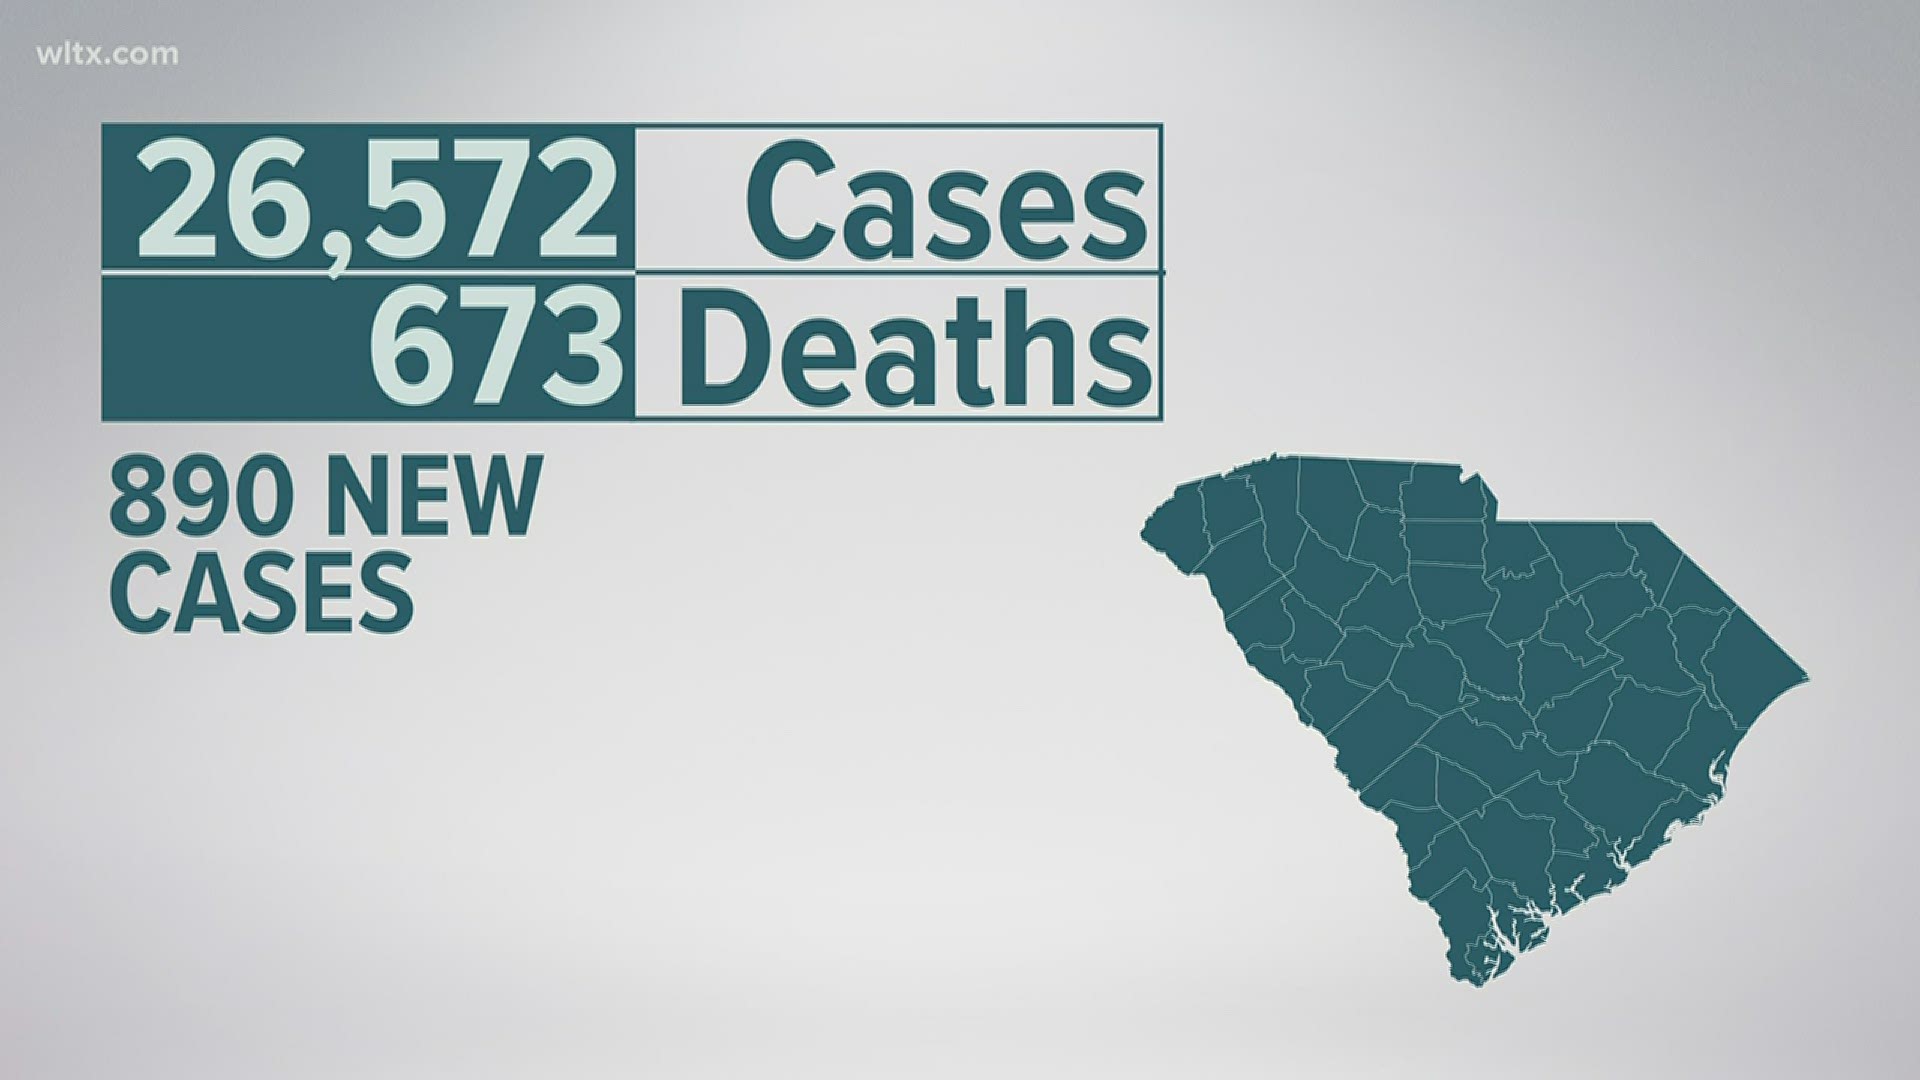 This brings the total number of people confirmed cases to 26,572, probable cases to 41, confirmed deaths to 673, and zero probable deaths.